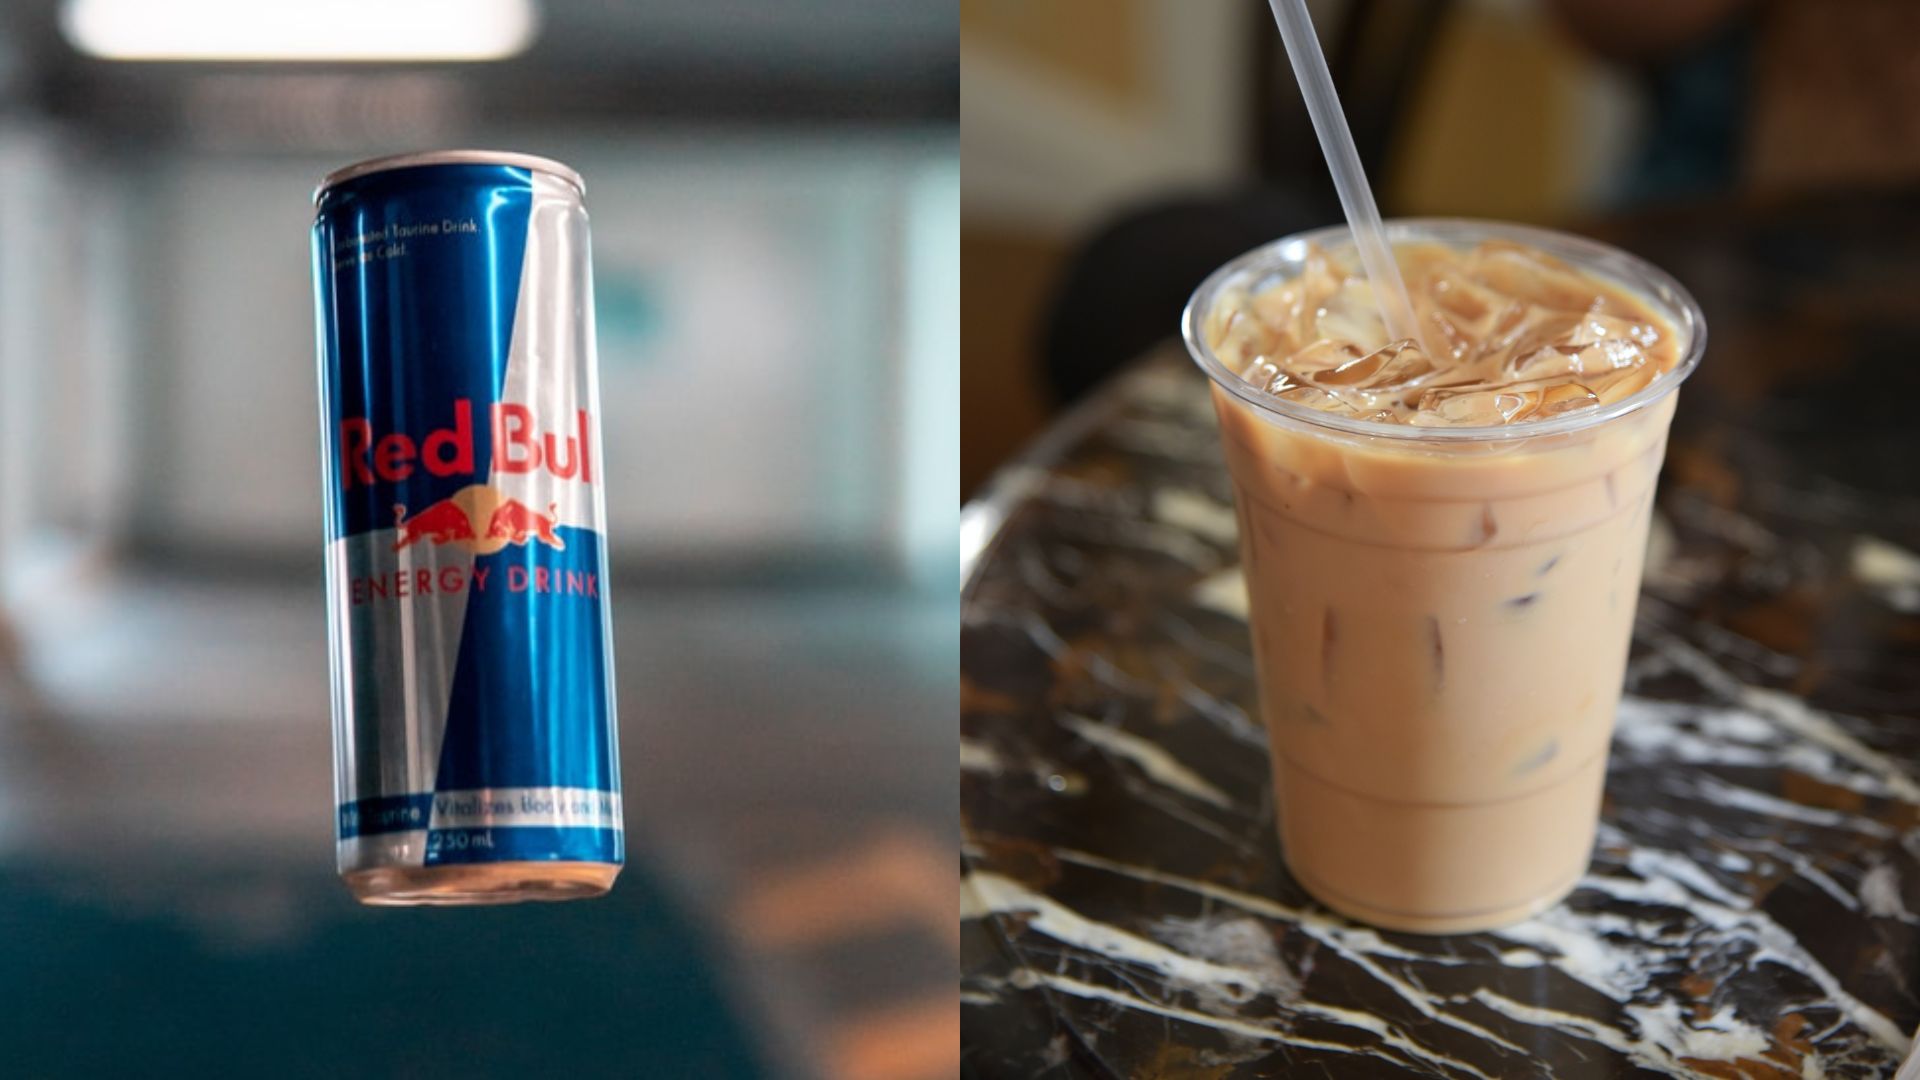 Caffeine in Red Bull vs. Coffee: Which Has More? By How Much?